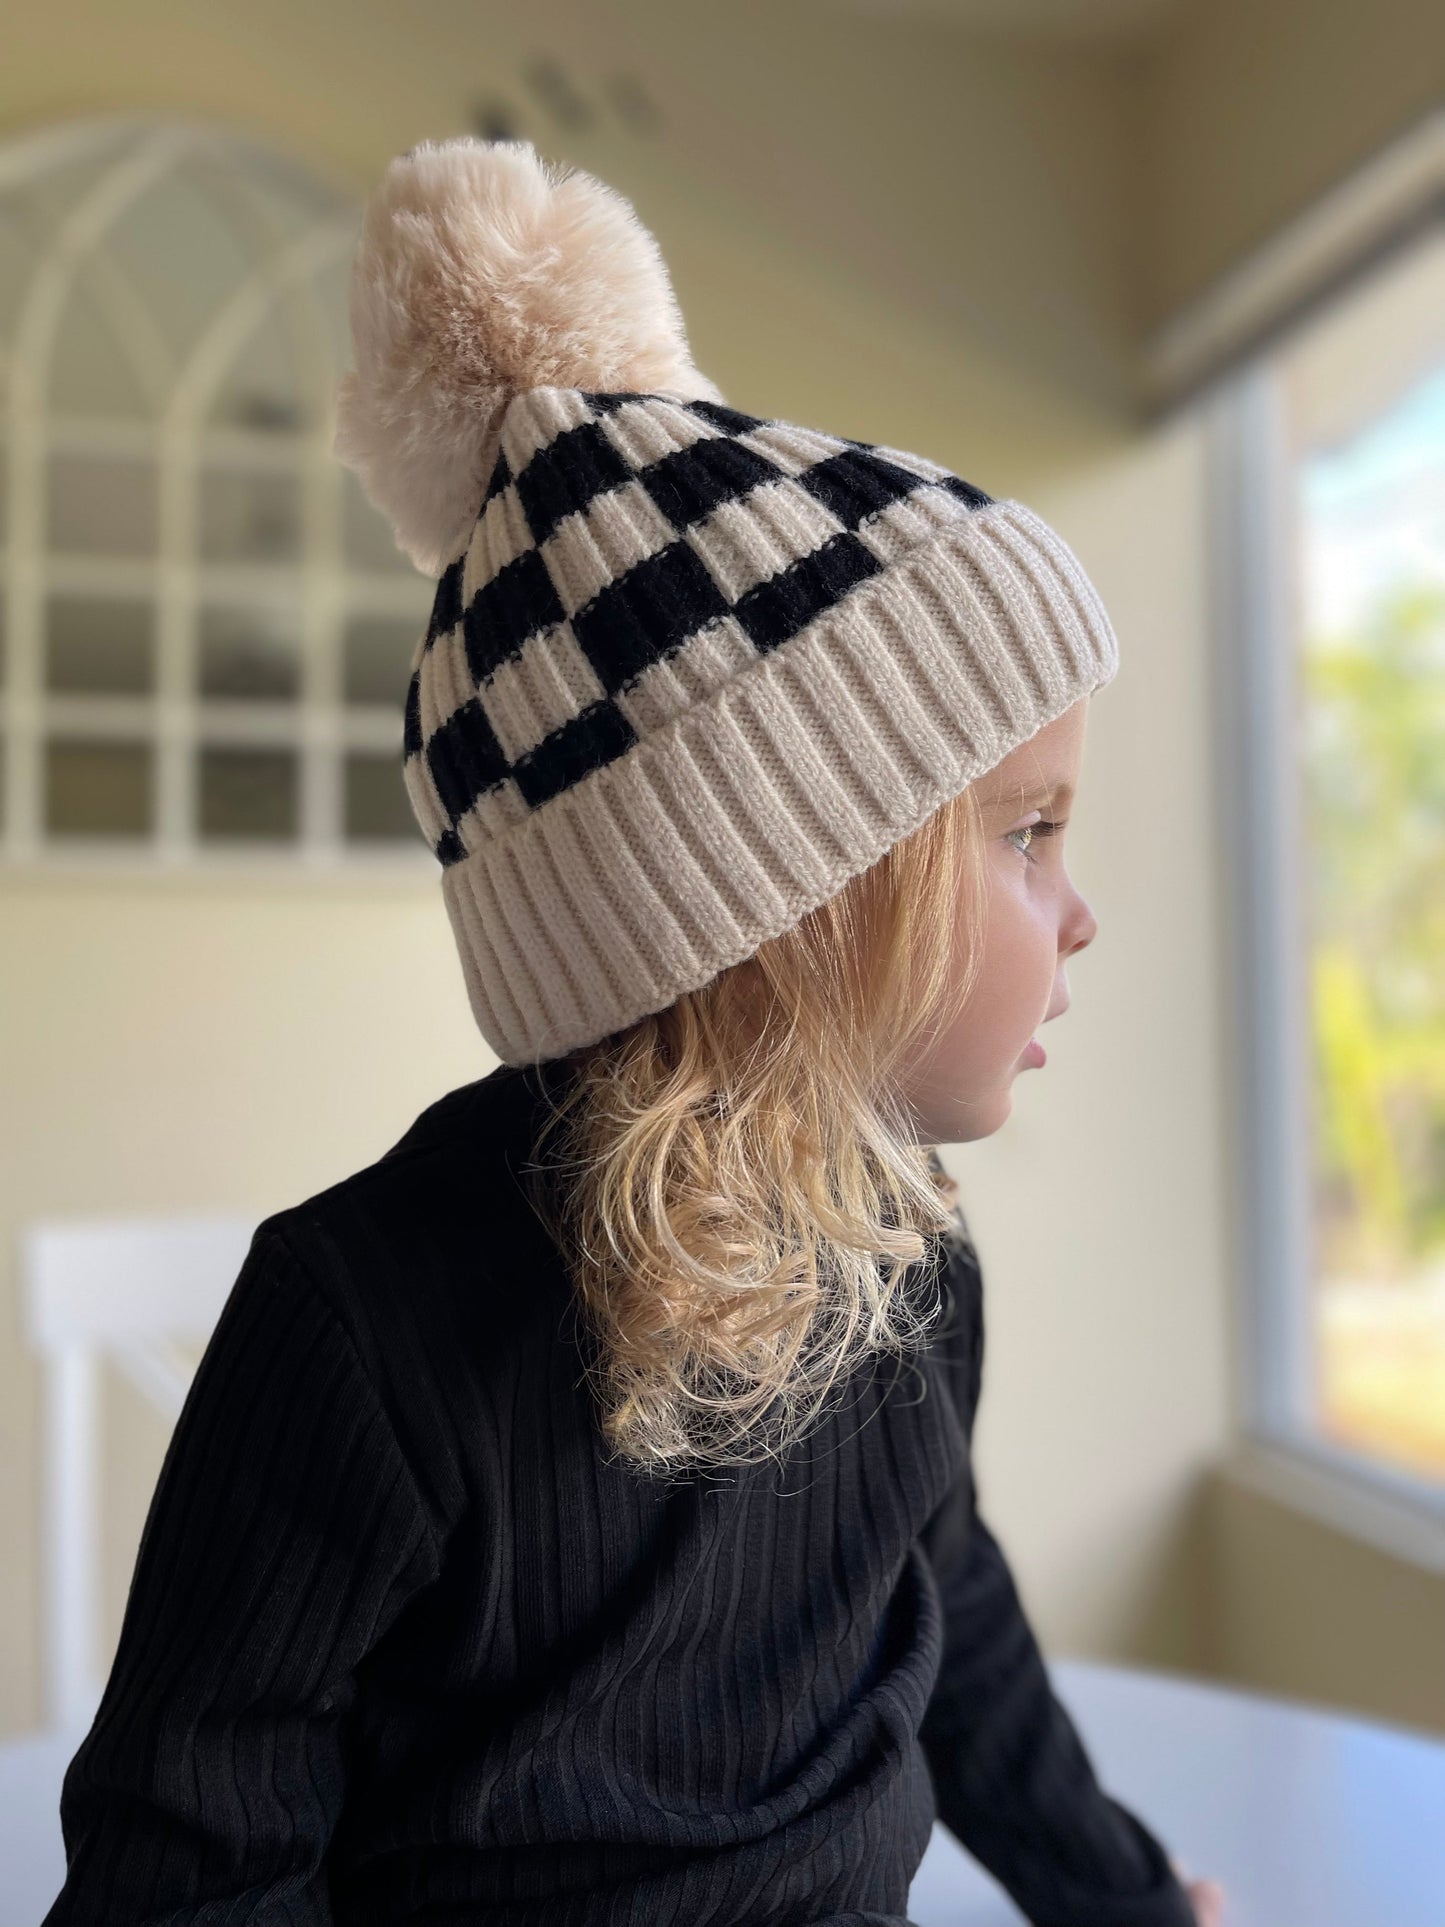 RESTOCK Checkered Pom Beanies - 5 Colors